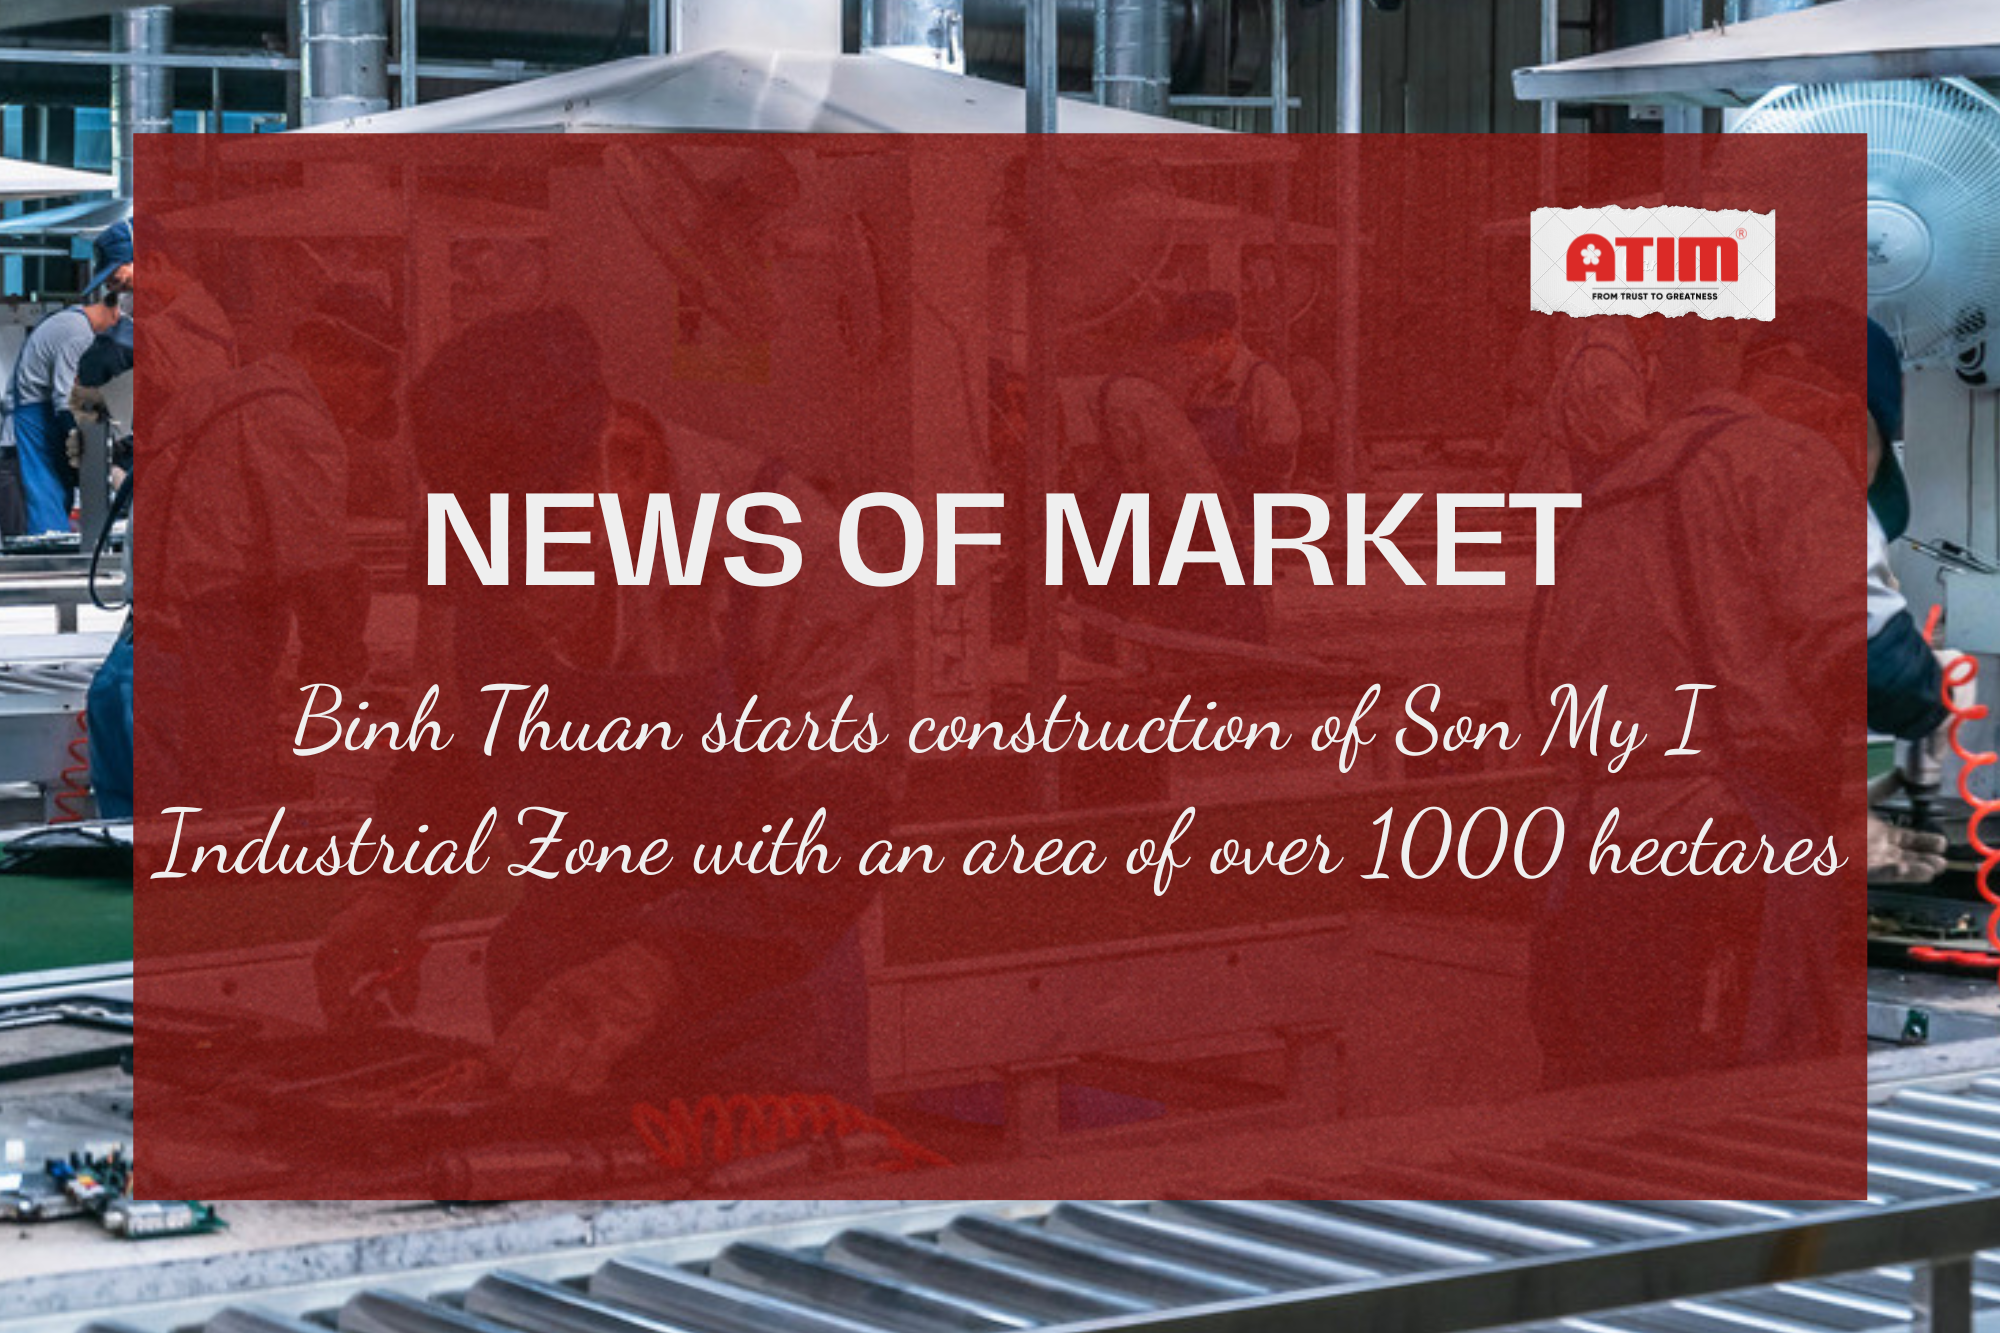 Industrial Real Estate - Binh Thuan starts construction of Son My I Industrial Zone with an area of over 1000 hectares